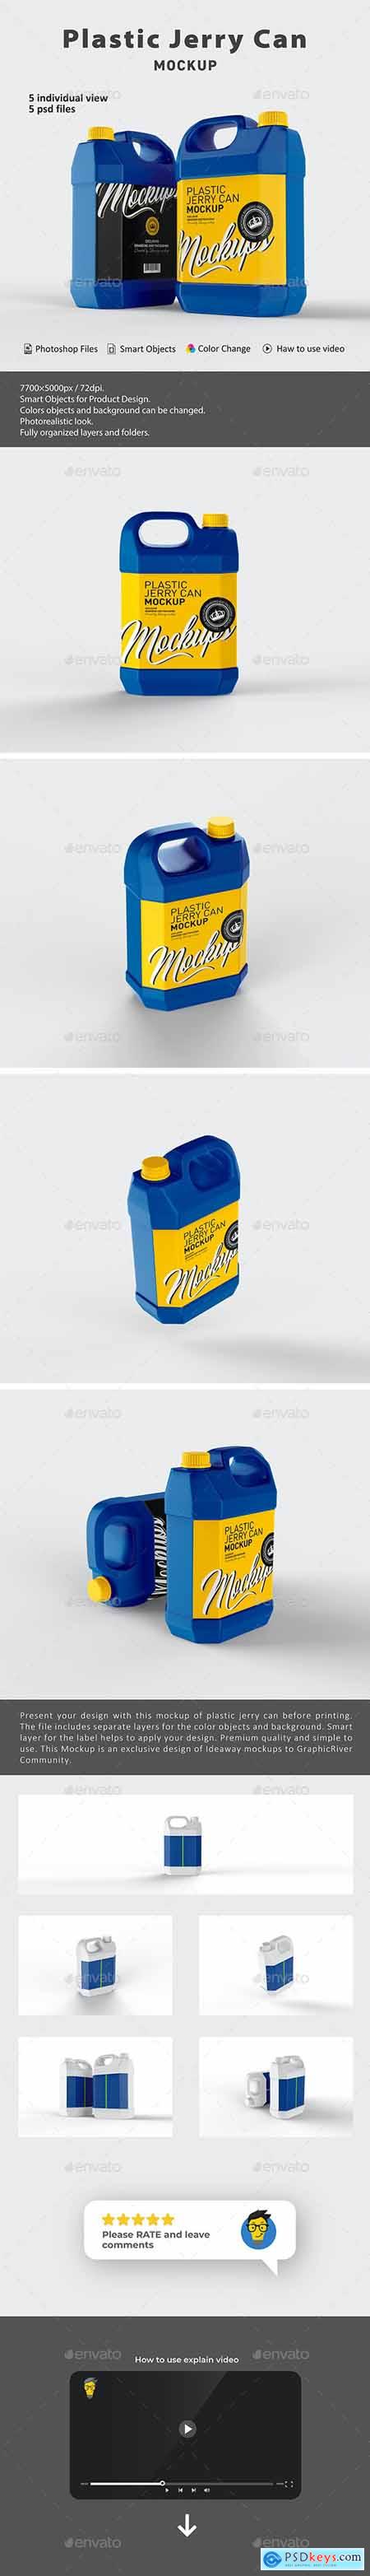 Plastic Jerry Can Mockup 26561750